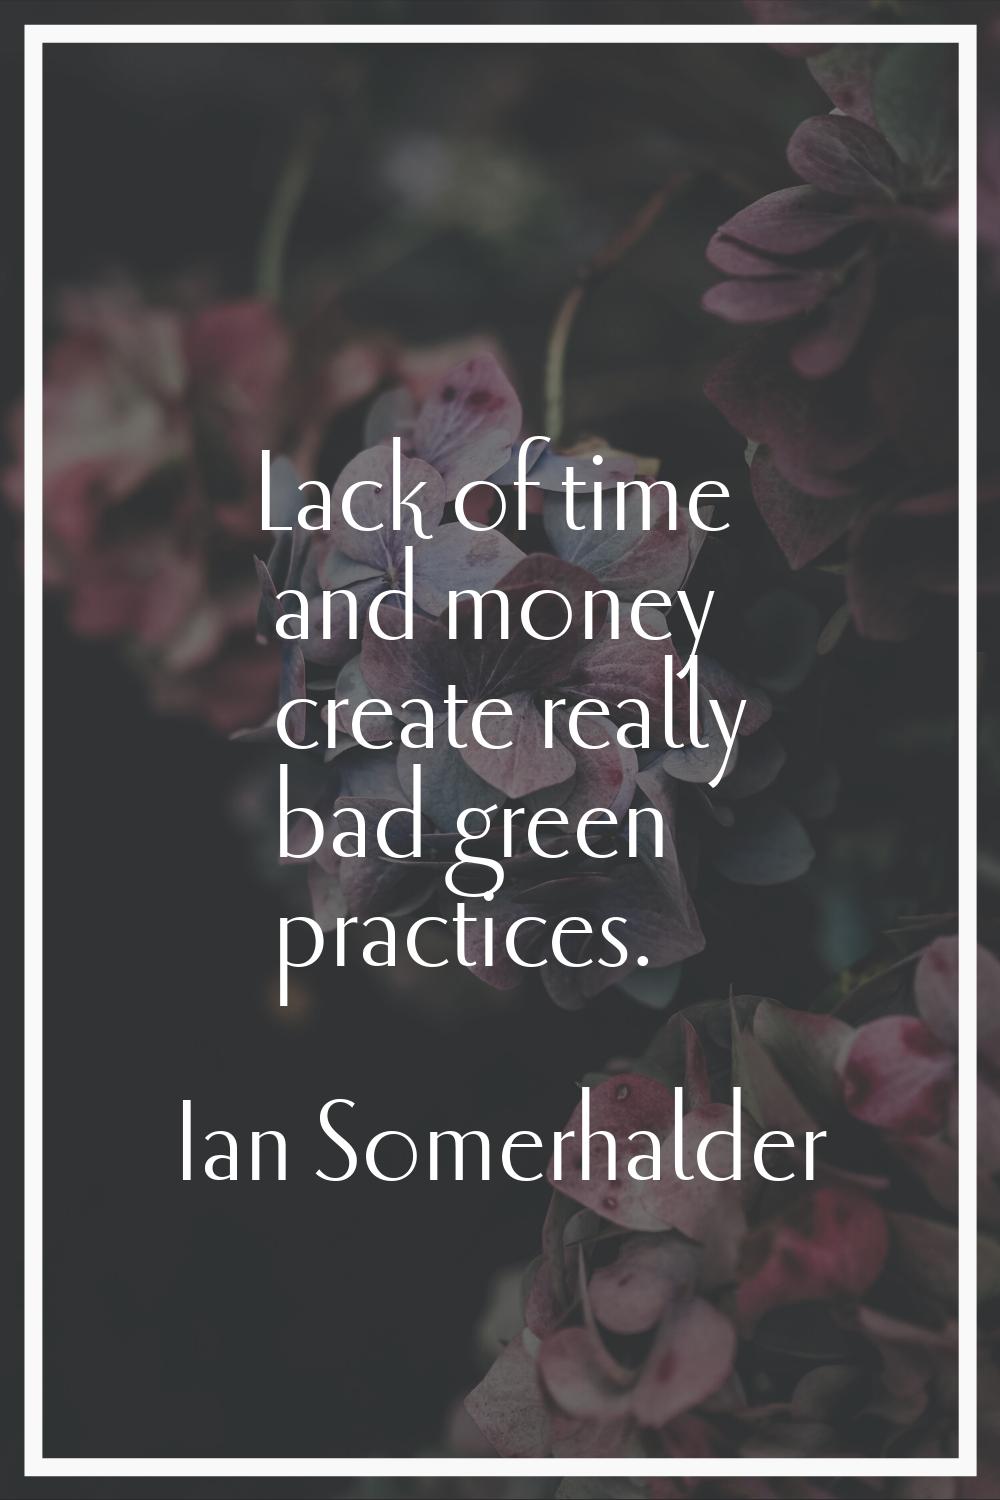 Lack of time and money create really bad green practices.